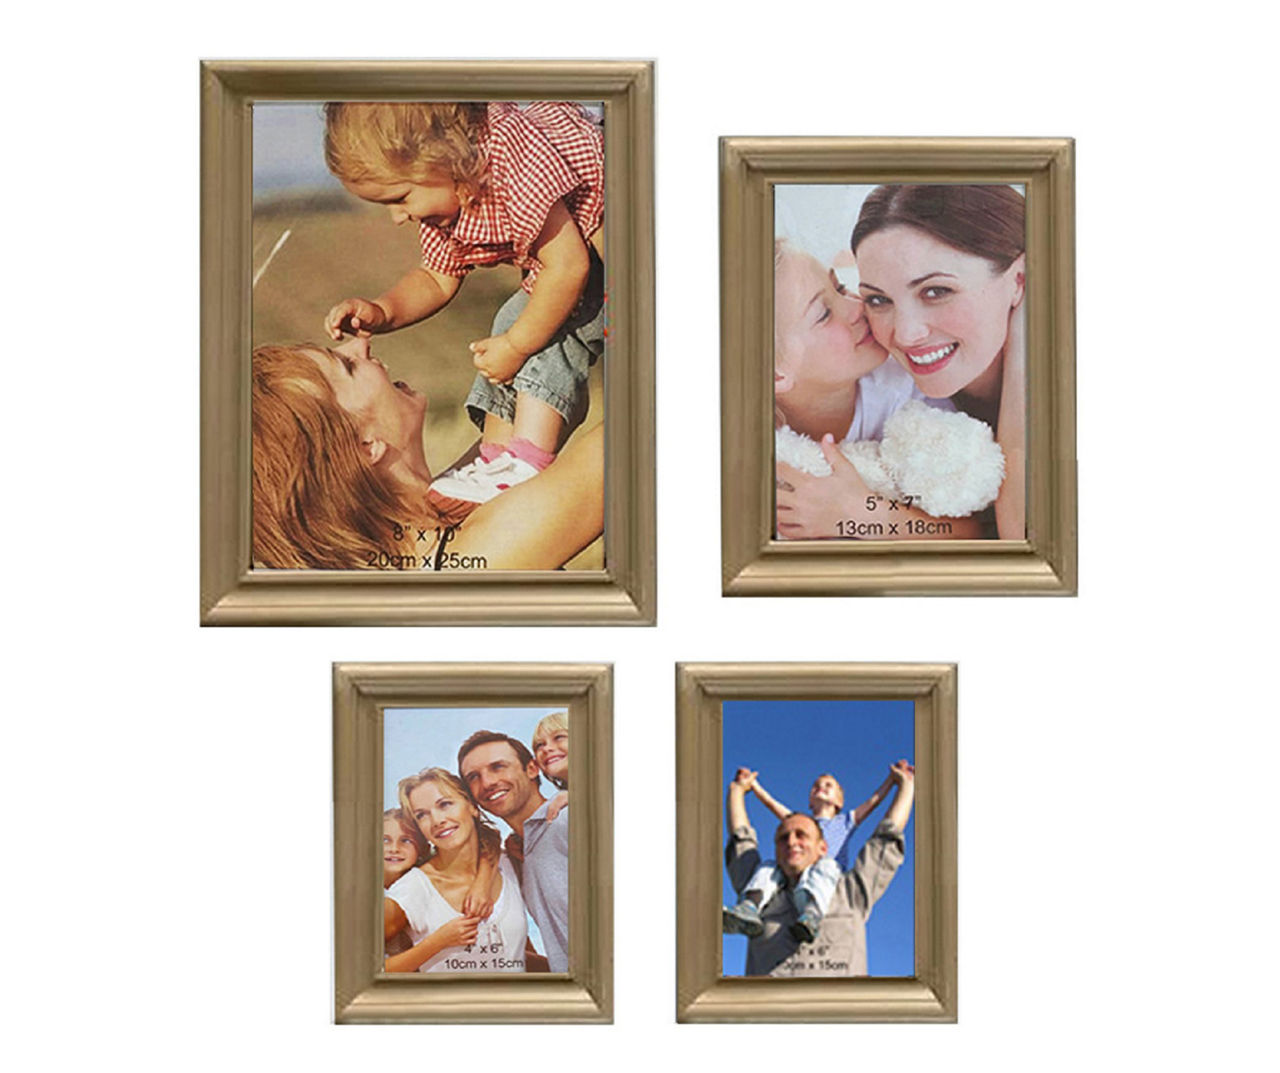 Set of 8 Collage Photo Frames : 5 x 7 (4 pieces), 4 x 6 (4 pieces) Brown